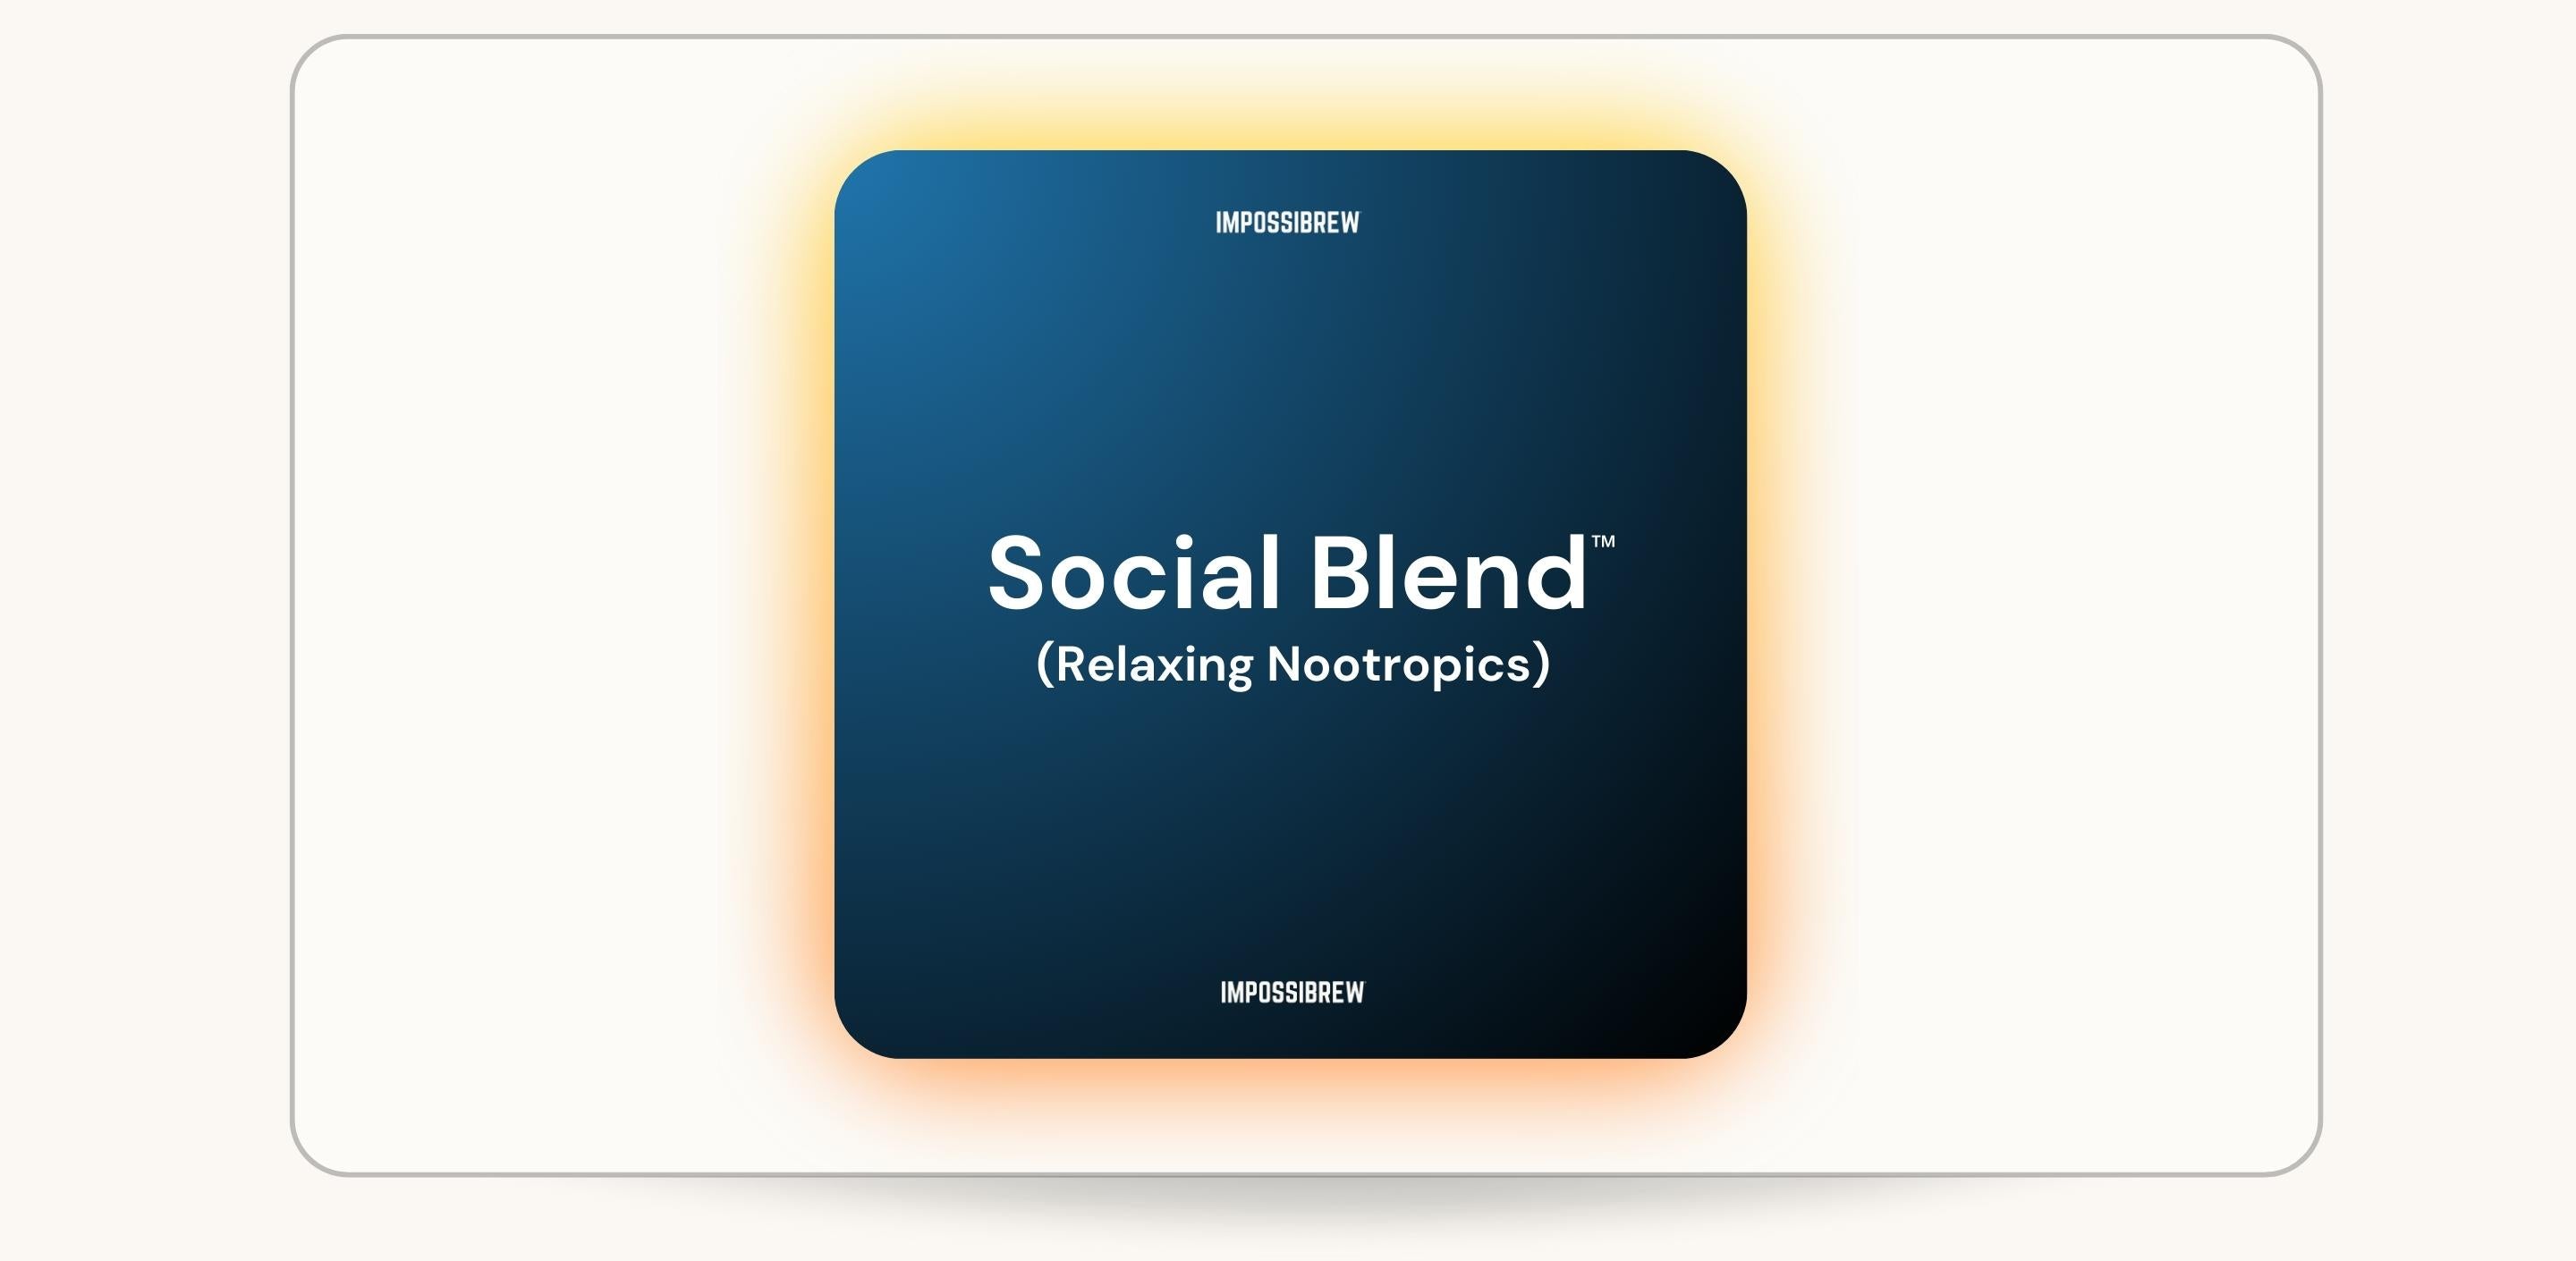 Introducing Social Blend™: The Nootropic Alcohol Alternative Revolutionising the No/Low Alcohol Industry.